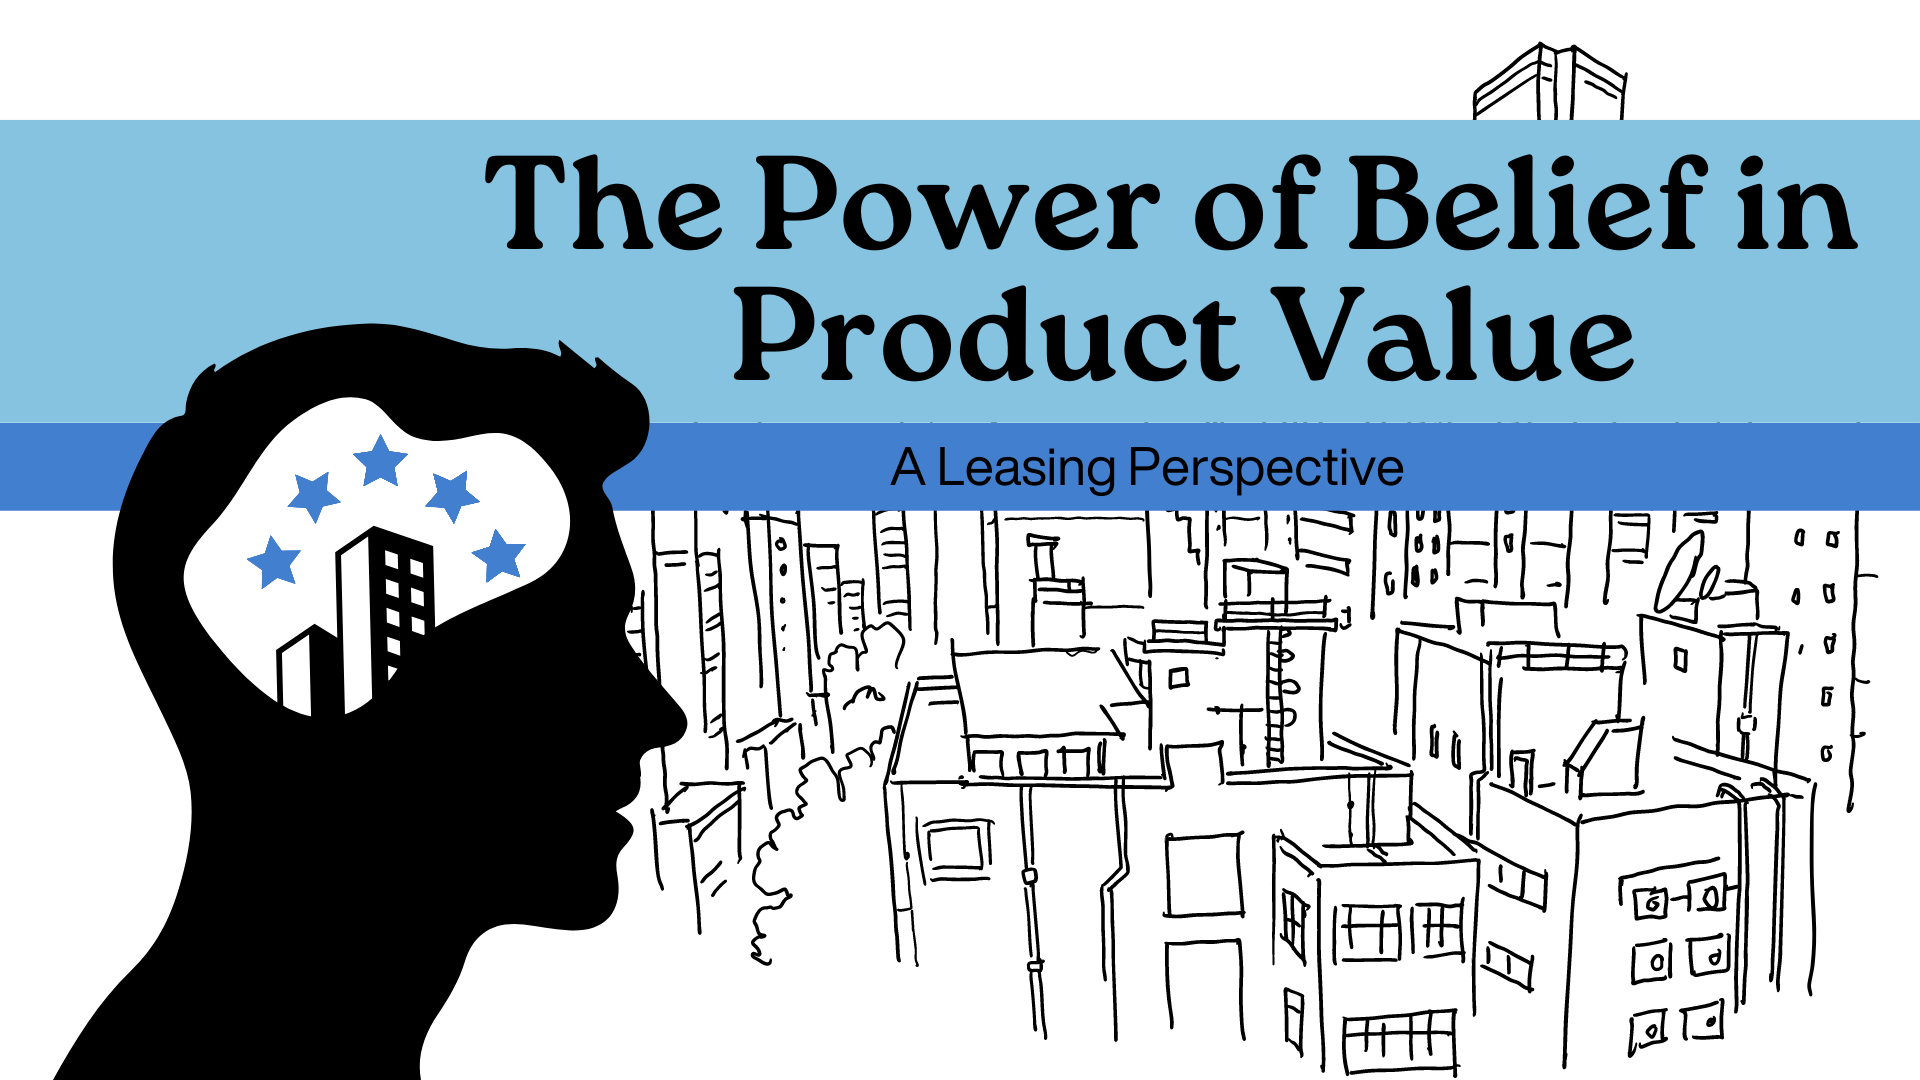 The Power of Belief in Product Value